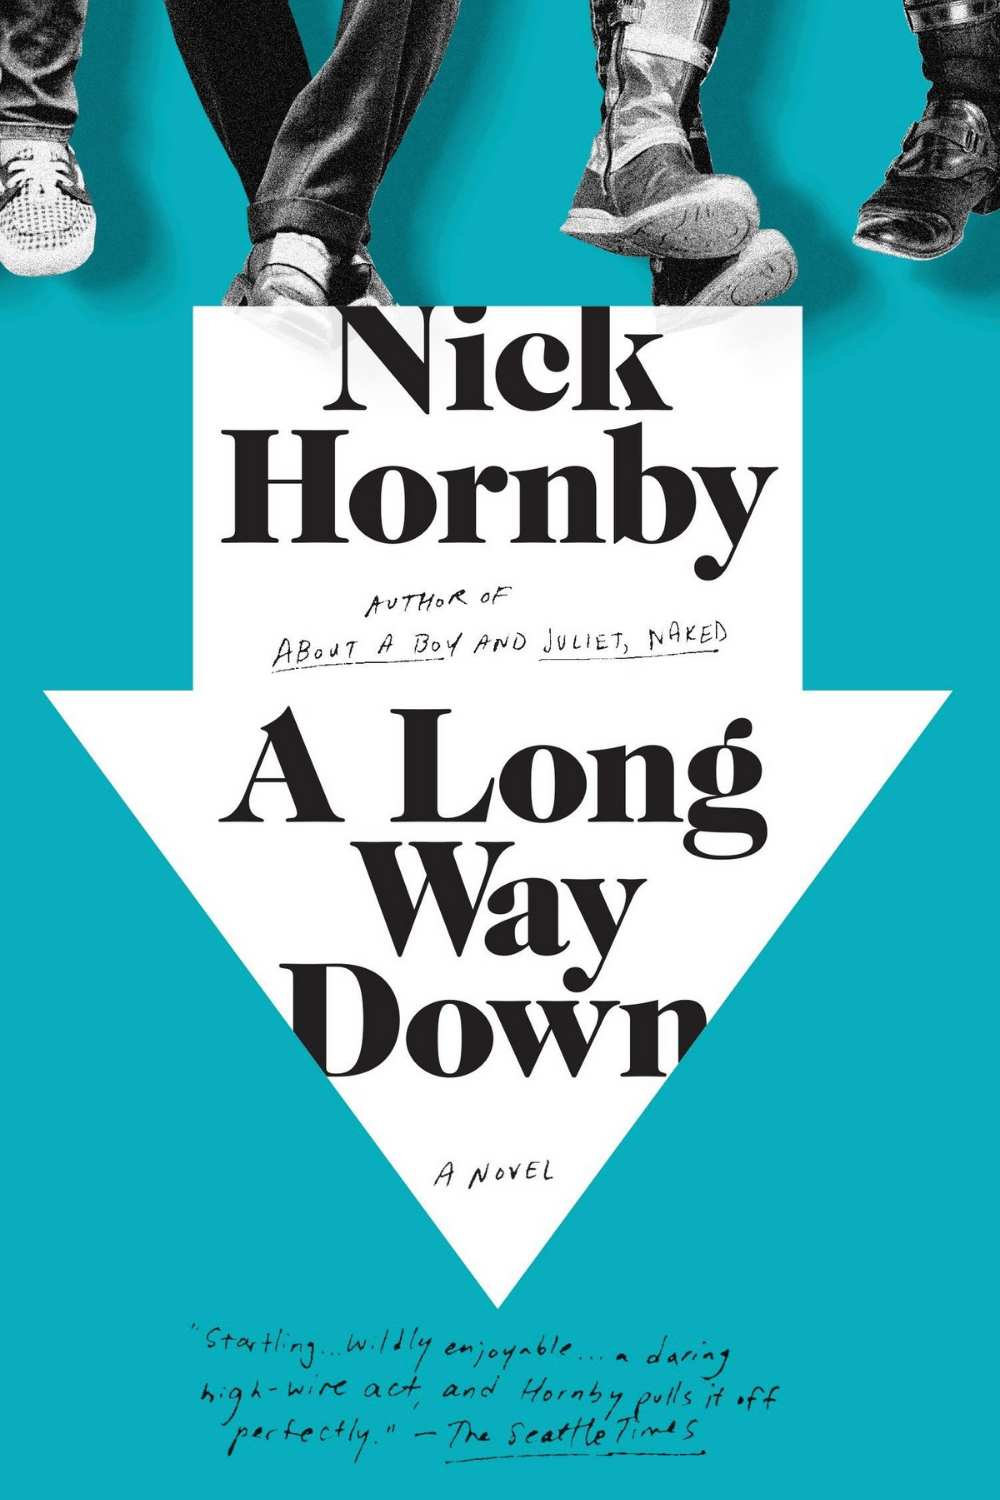 The long way like. A long way down. Nick Hornby. Nick Hornby book. Long way down Hornby.